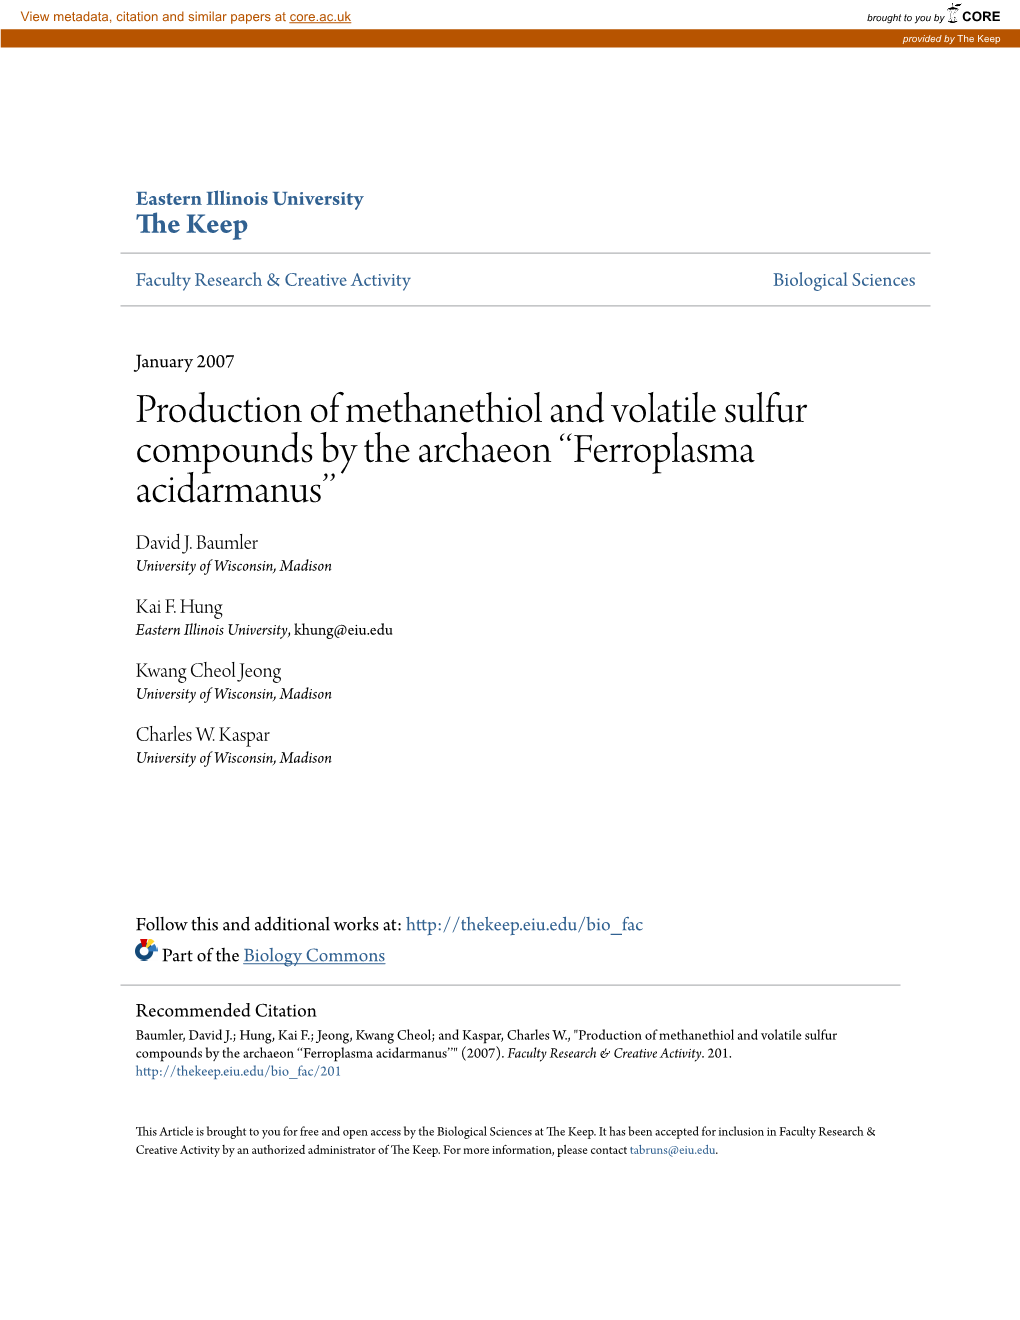 Production of Methanethiol and Volatile Sulfur Compounds by the Archaeon ‘‘Ferroplasma Acidarmanus’’ David J